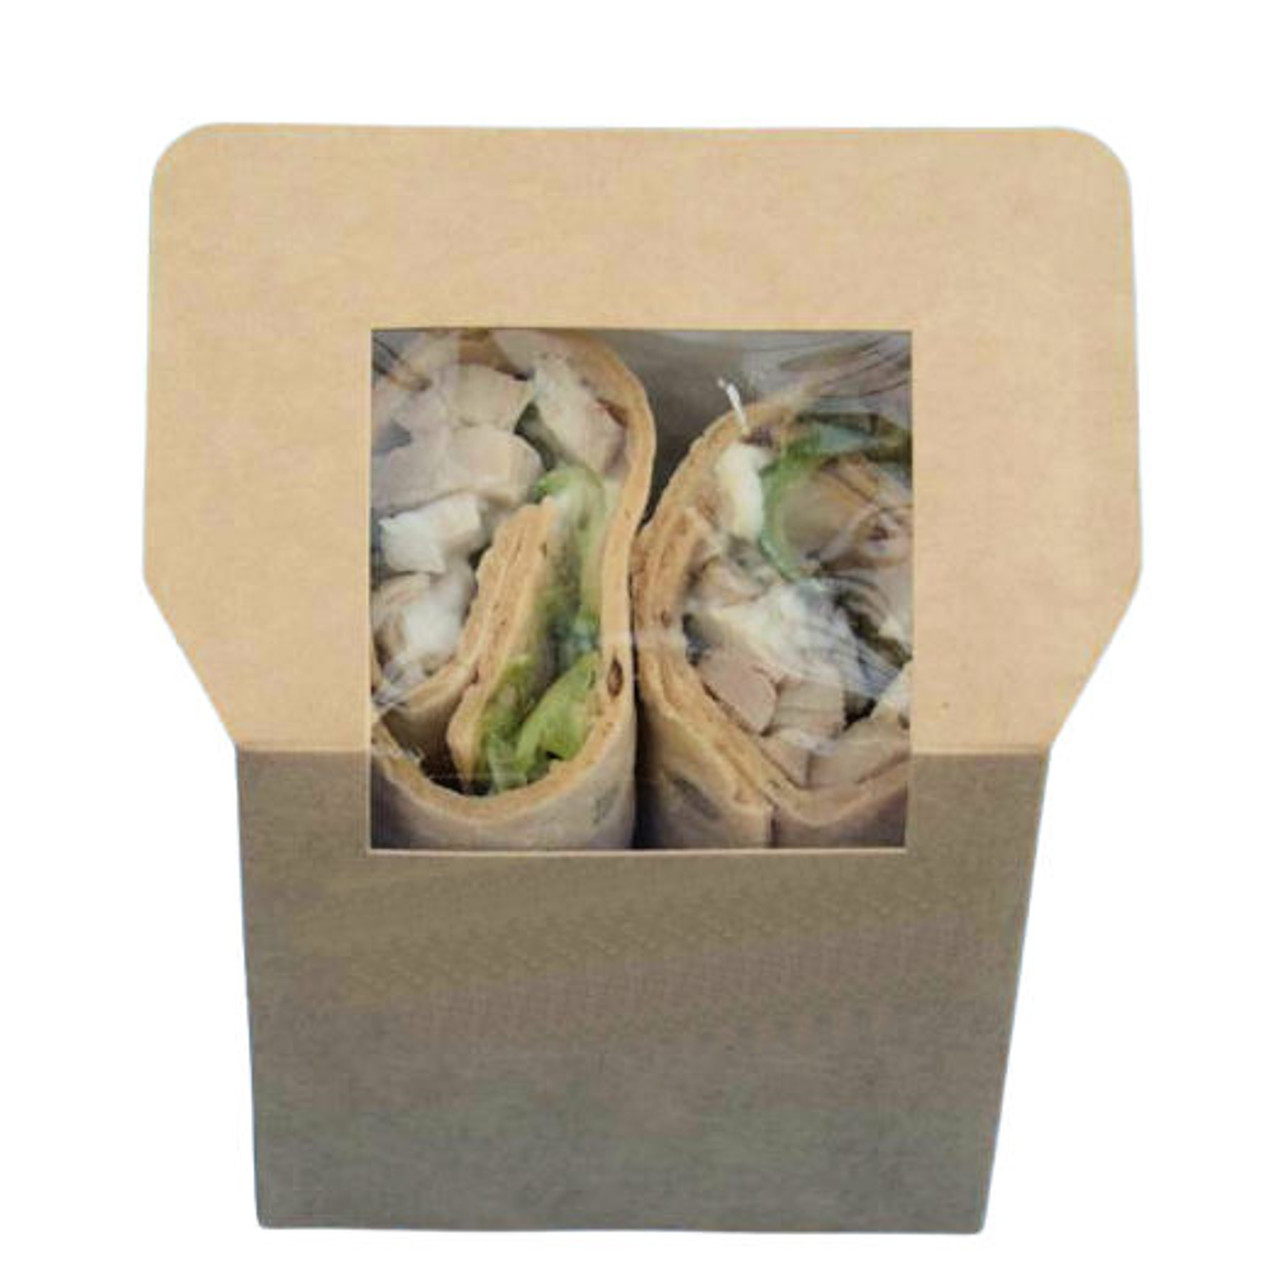 HEAT SEAL Compostable Kraft Brown Earth Tortilla Wrap Boxes - Case x 168 Only 